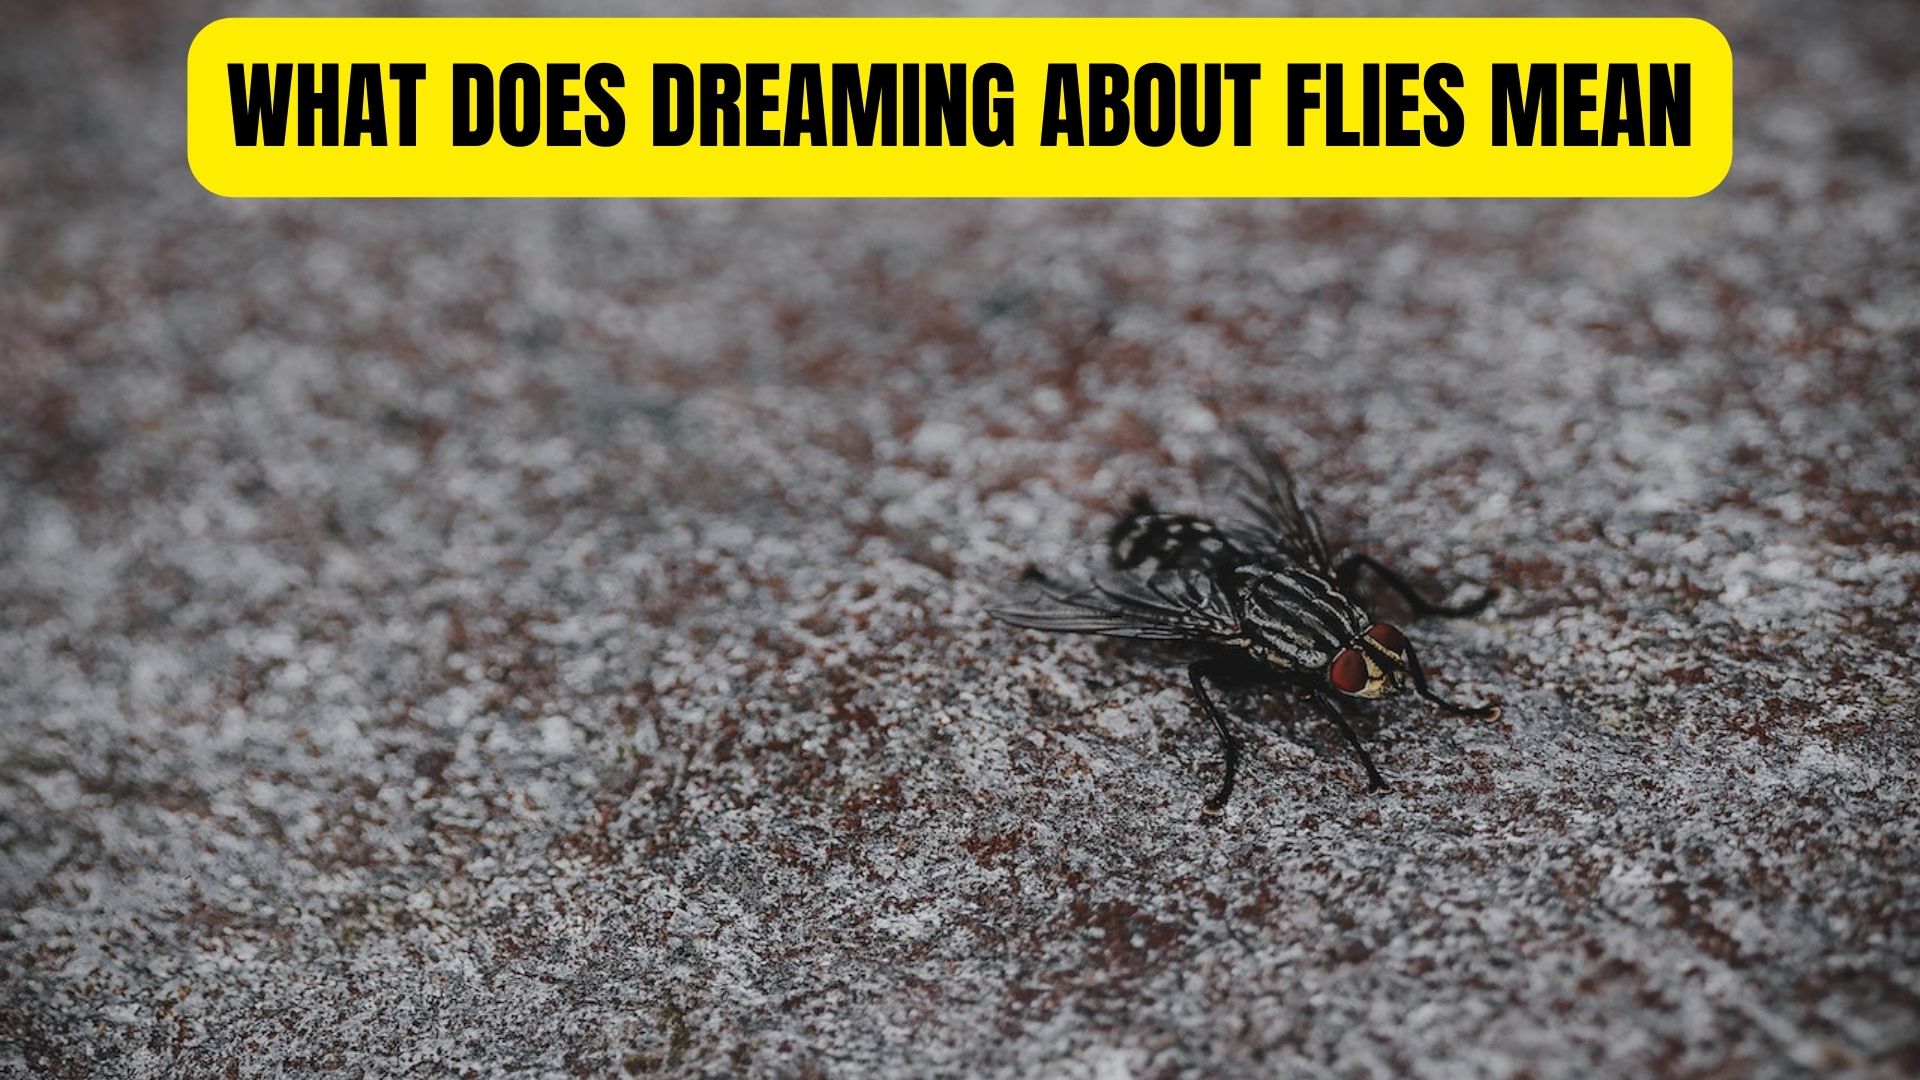 What Does Dreaming About Flies Mean?